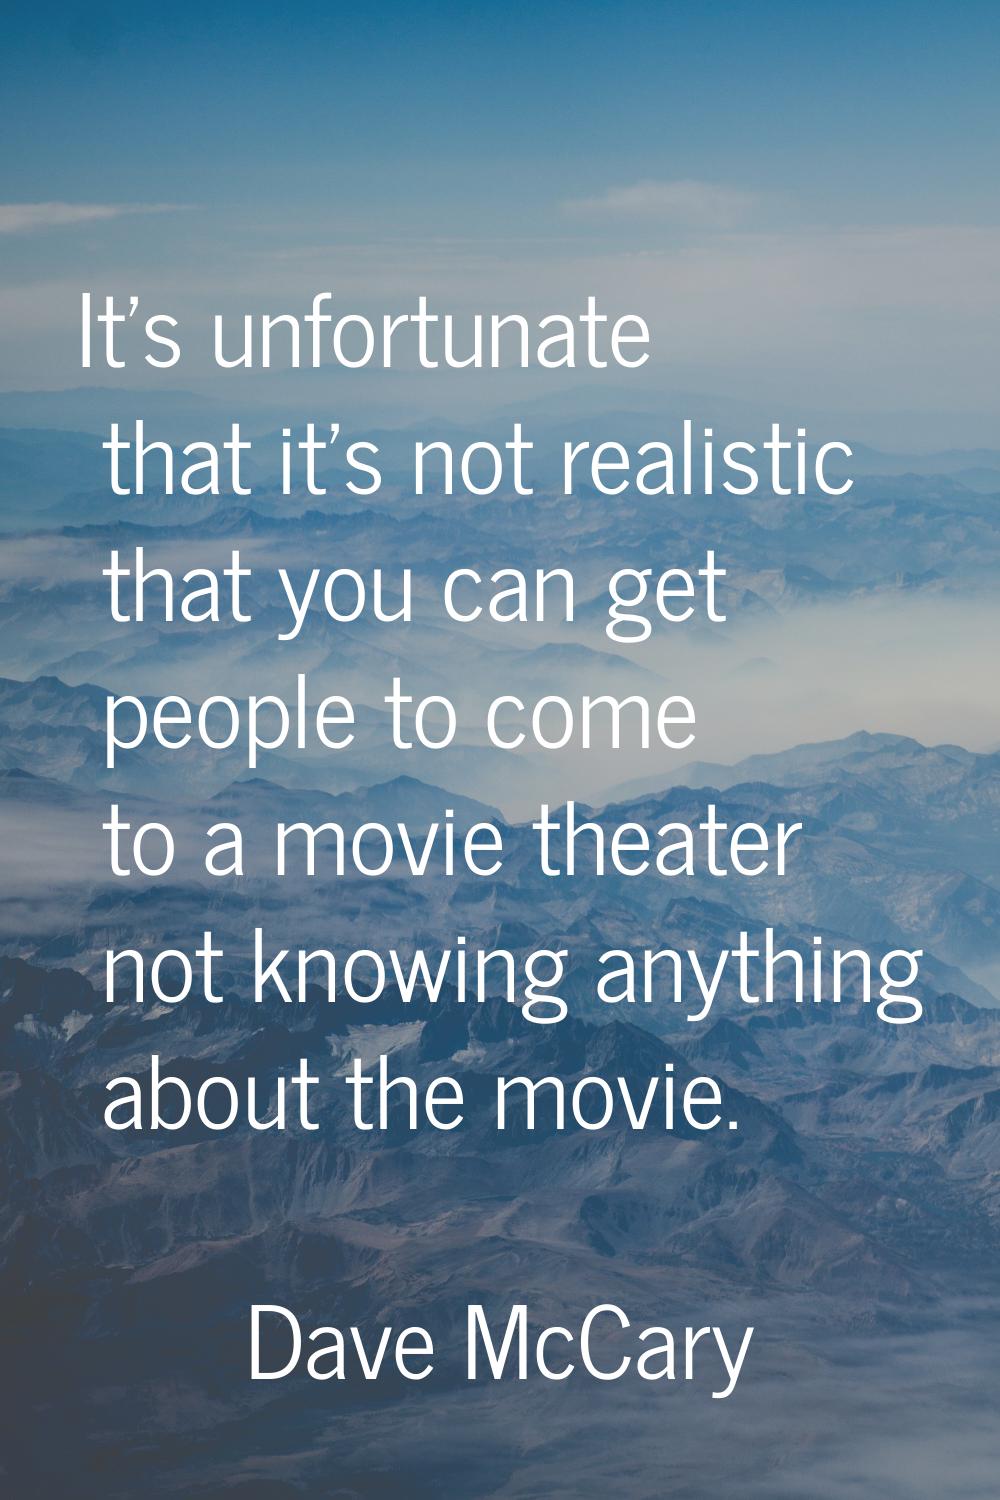 It's unfortunate that it's not realistic that you can get people to come to a movie theater not kno